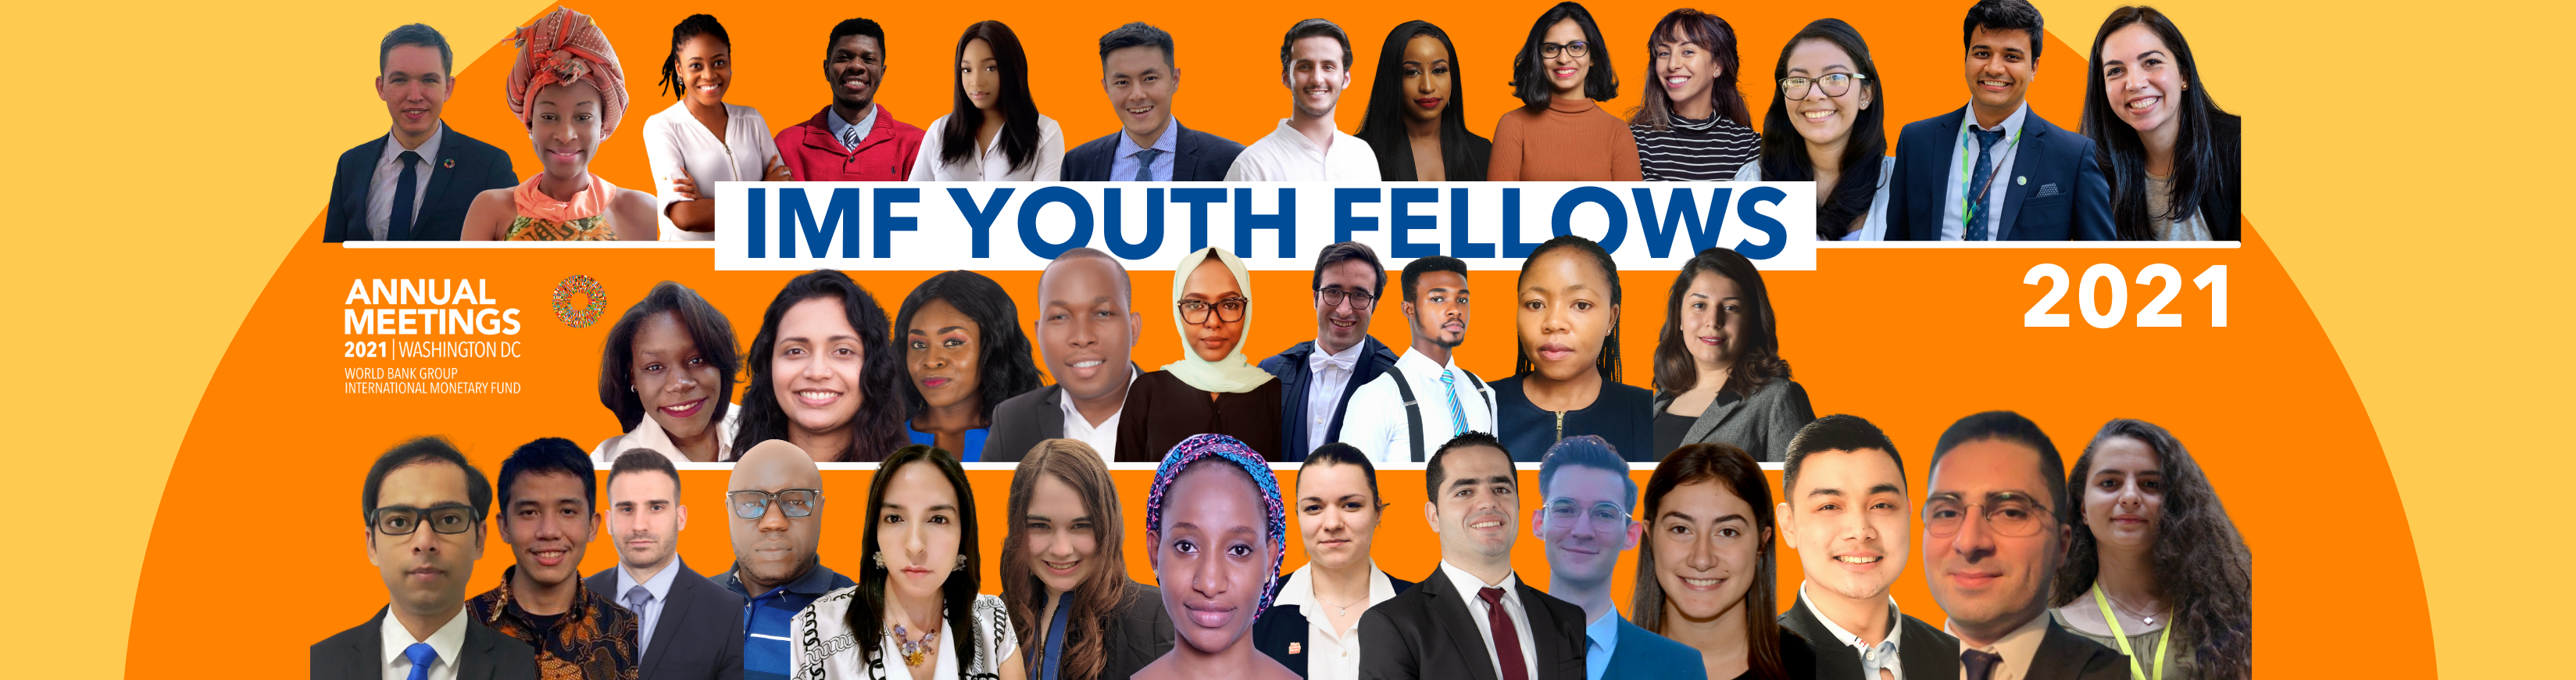 IMF Youth Fellows